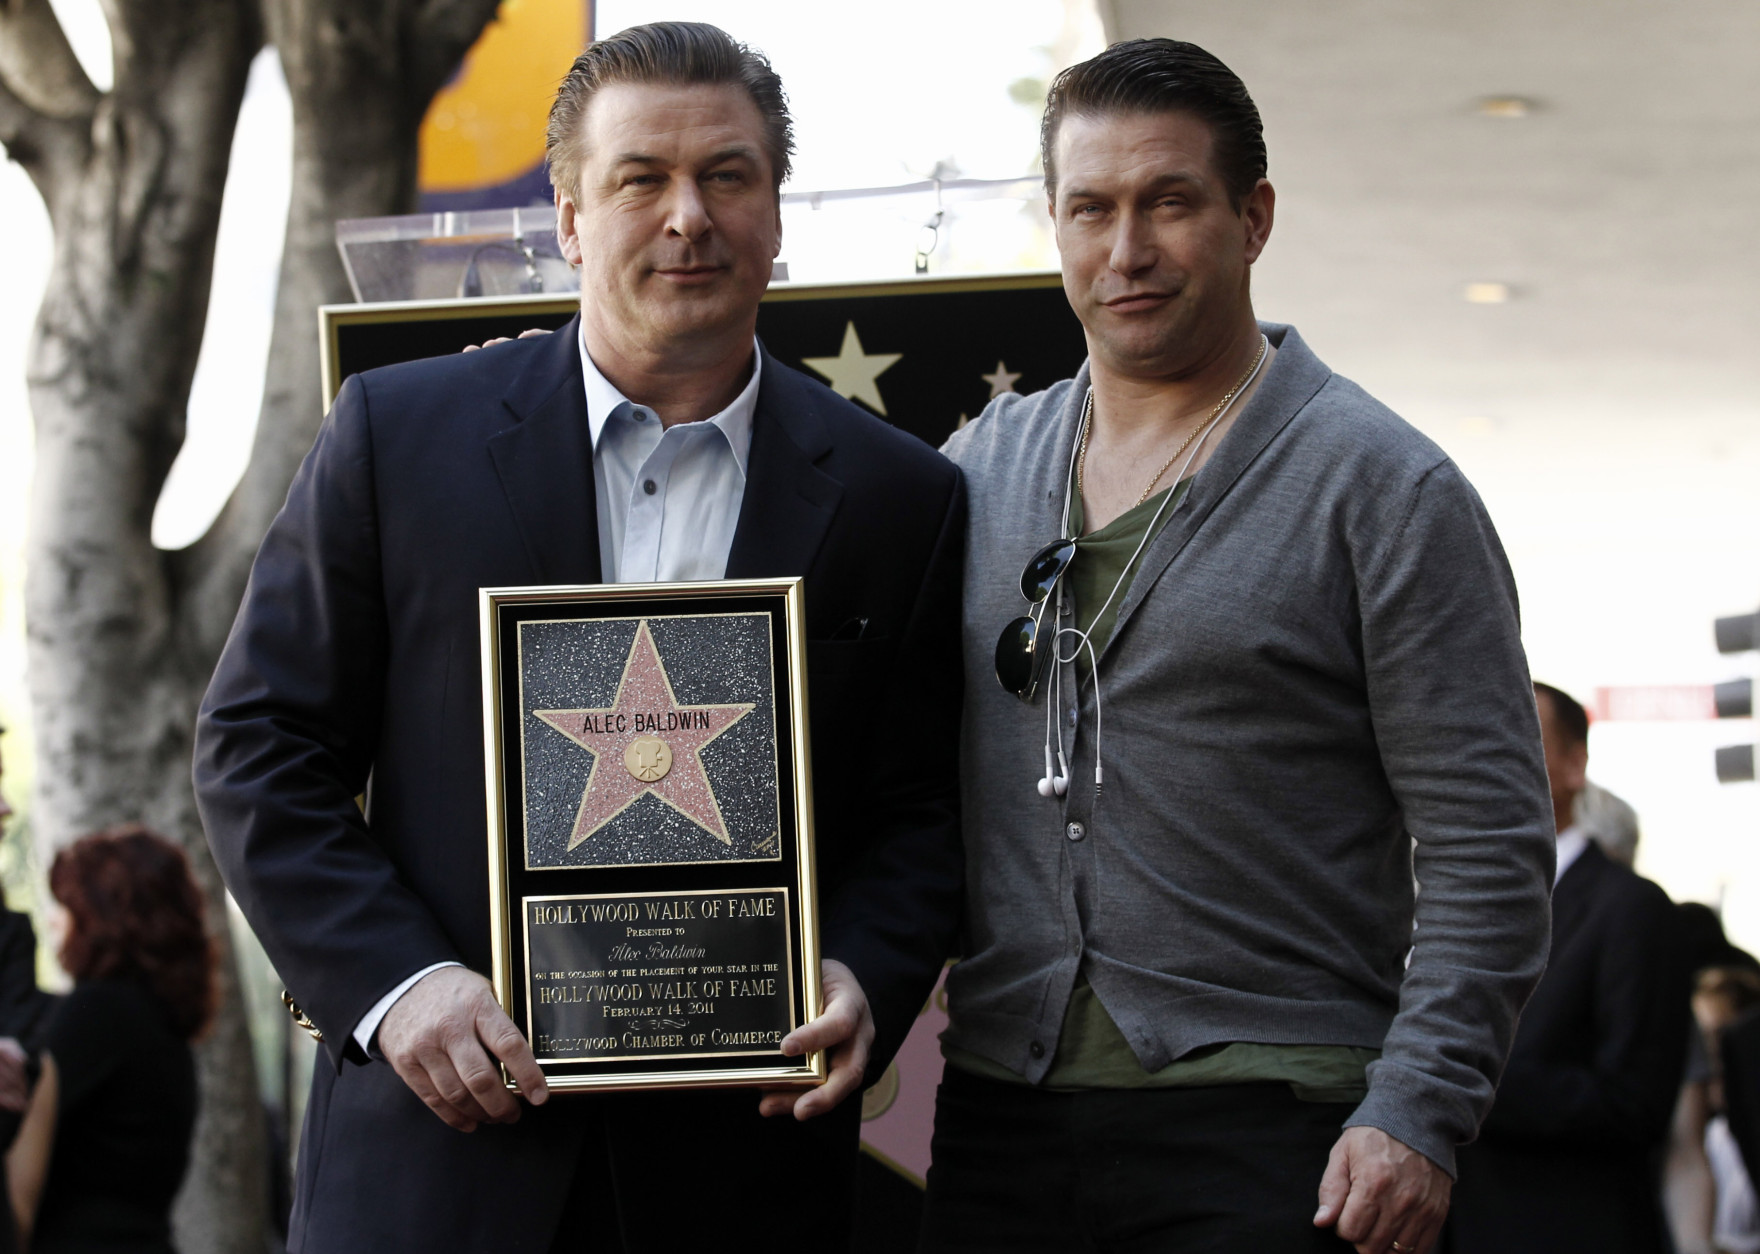 Alec Baldwin, left, and Stephen Baldwin pose together after Alec Baldwin received a star on the Hollywood Walk of Fame in Los Angeles on Monday, Feb. 14, 2011. (AP Photo/Matt Sayles)